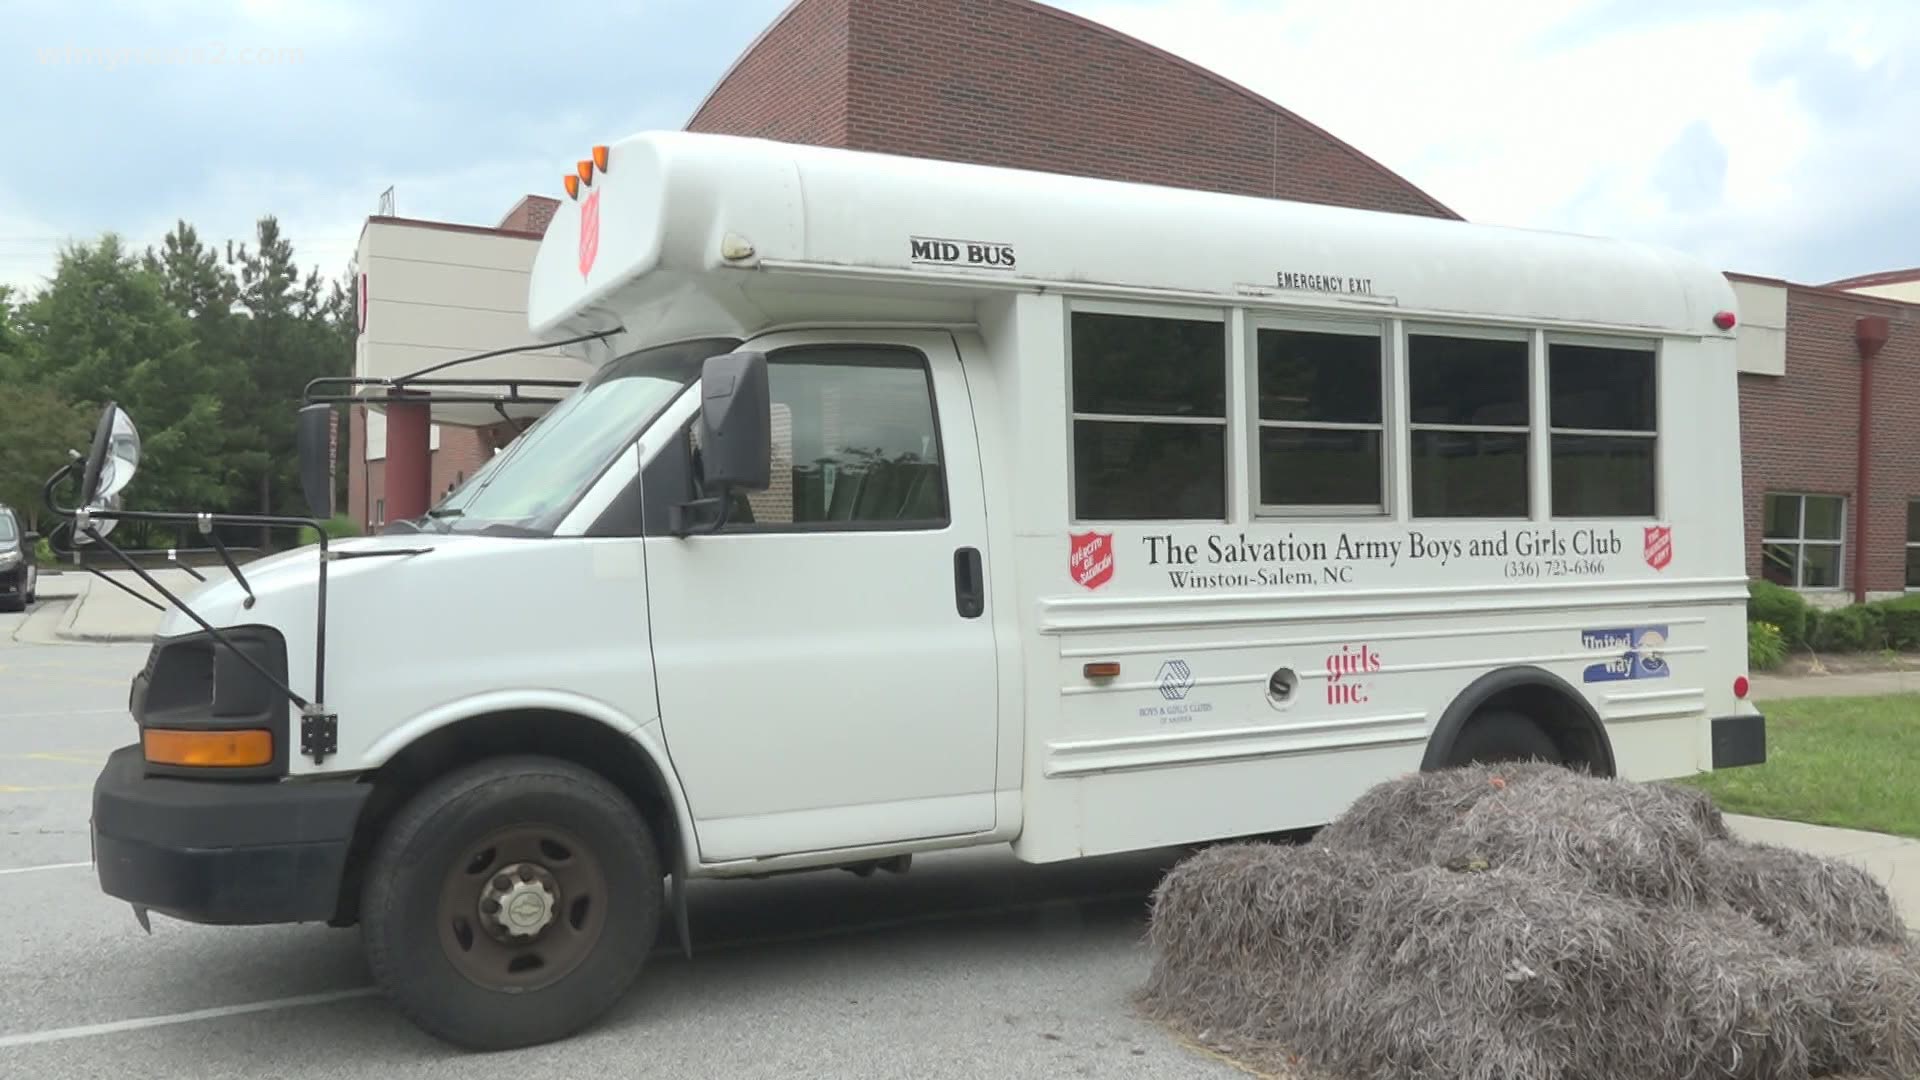 Officials at the Salvation Army Boys and Girls Club in Winston-Salem say over the last three months vandals have targeted their activity buses.